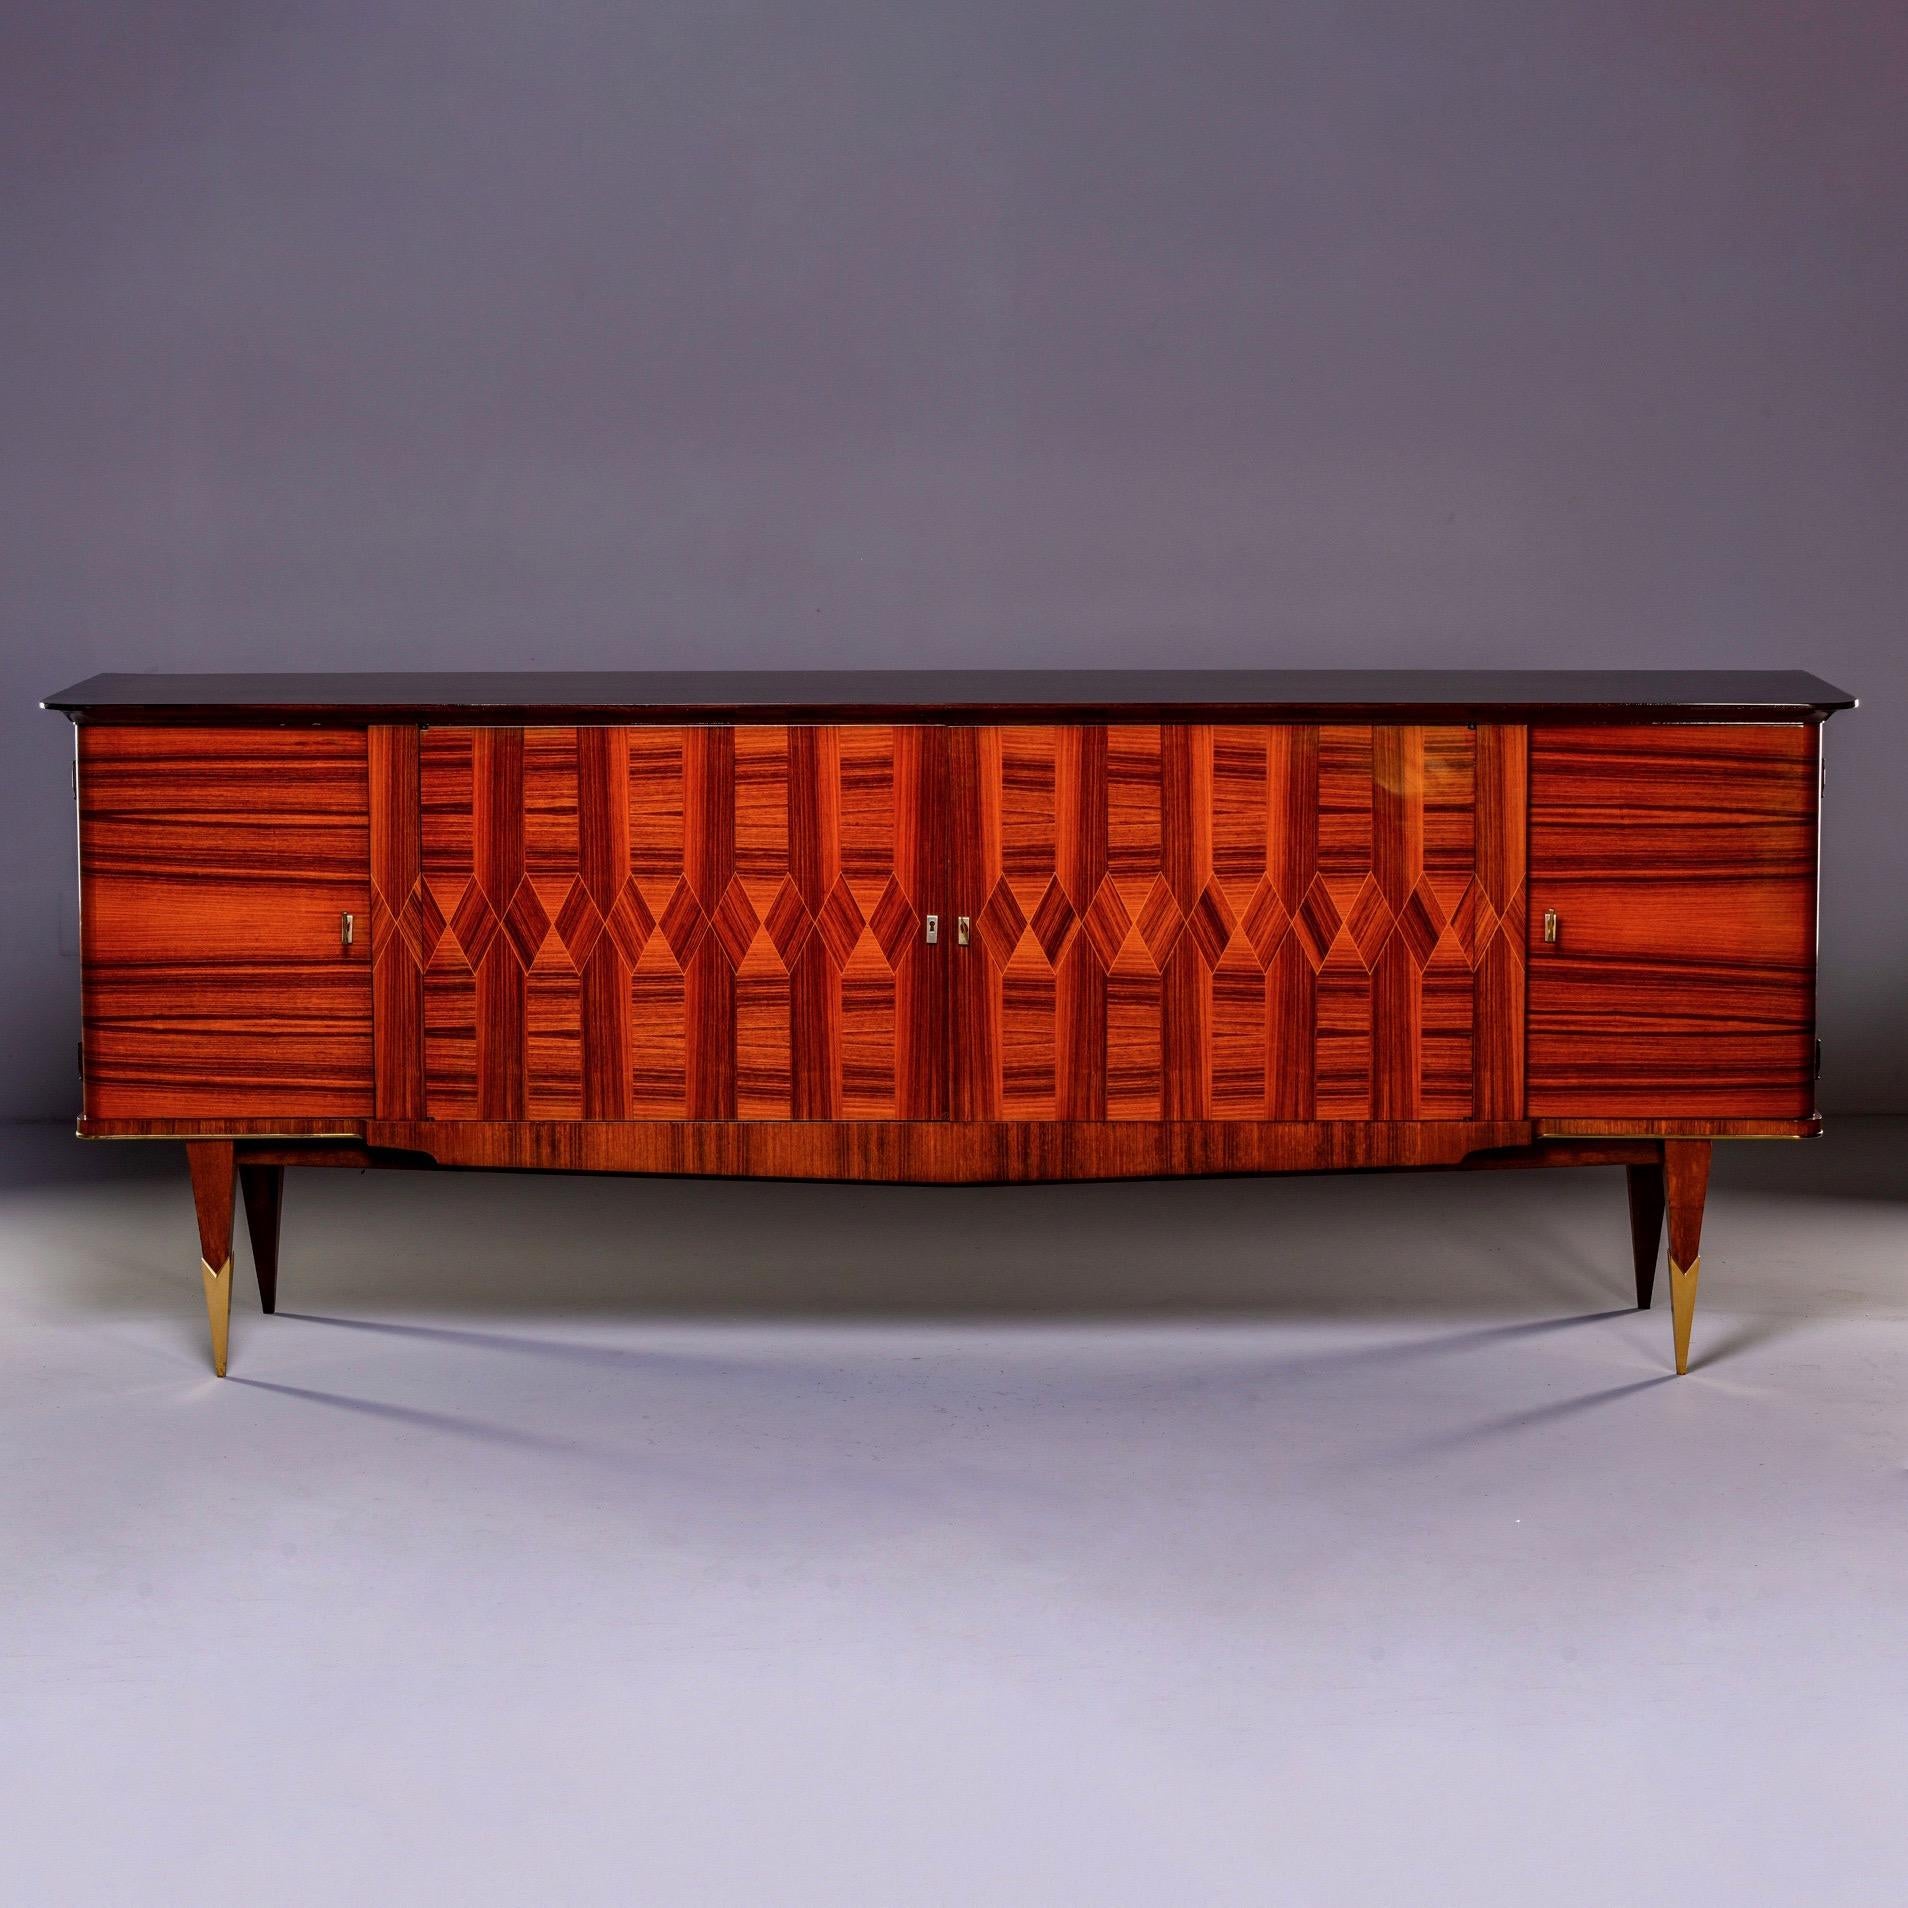 French extra large Art Deco buffet or credenza in Macassar, circa 1940s. Top of cabinet is ebonized wihile front features elaborate geometric marquetry. Locking cabinets on each end feature a top drawer with open storage below. The middle